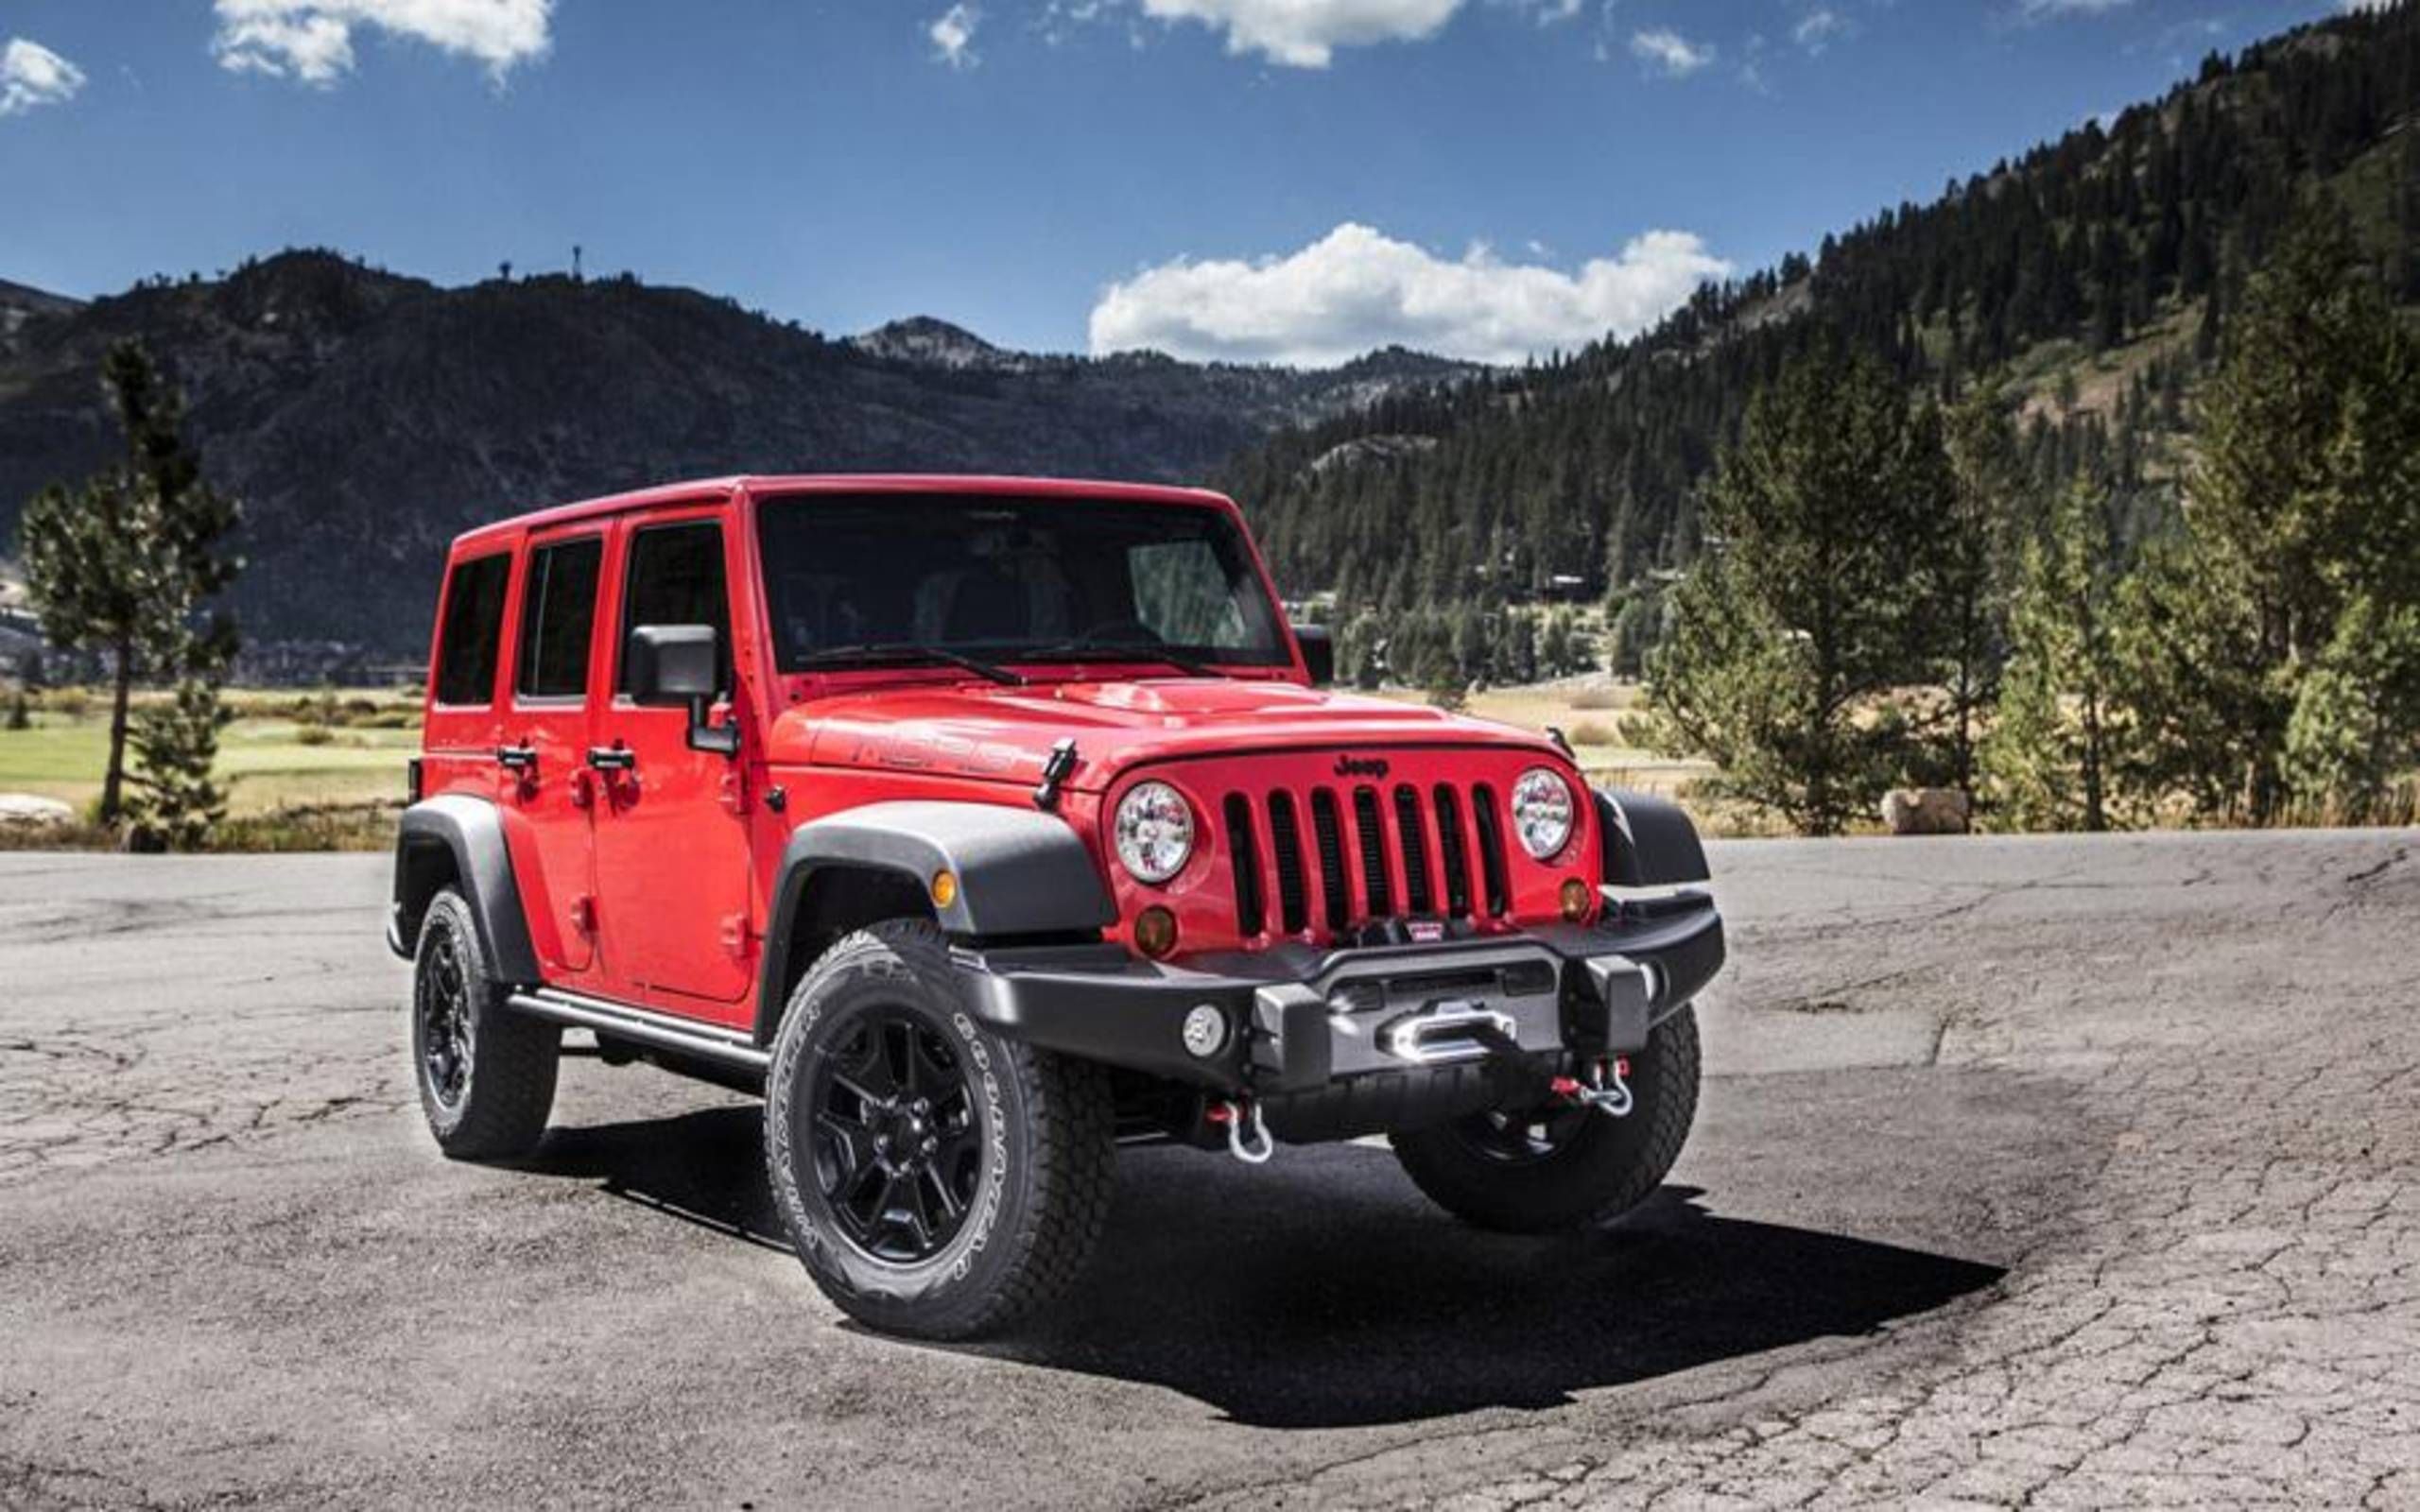 2013 Jeep Wrangler Unlimited Moab Edition review notes